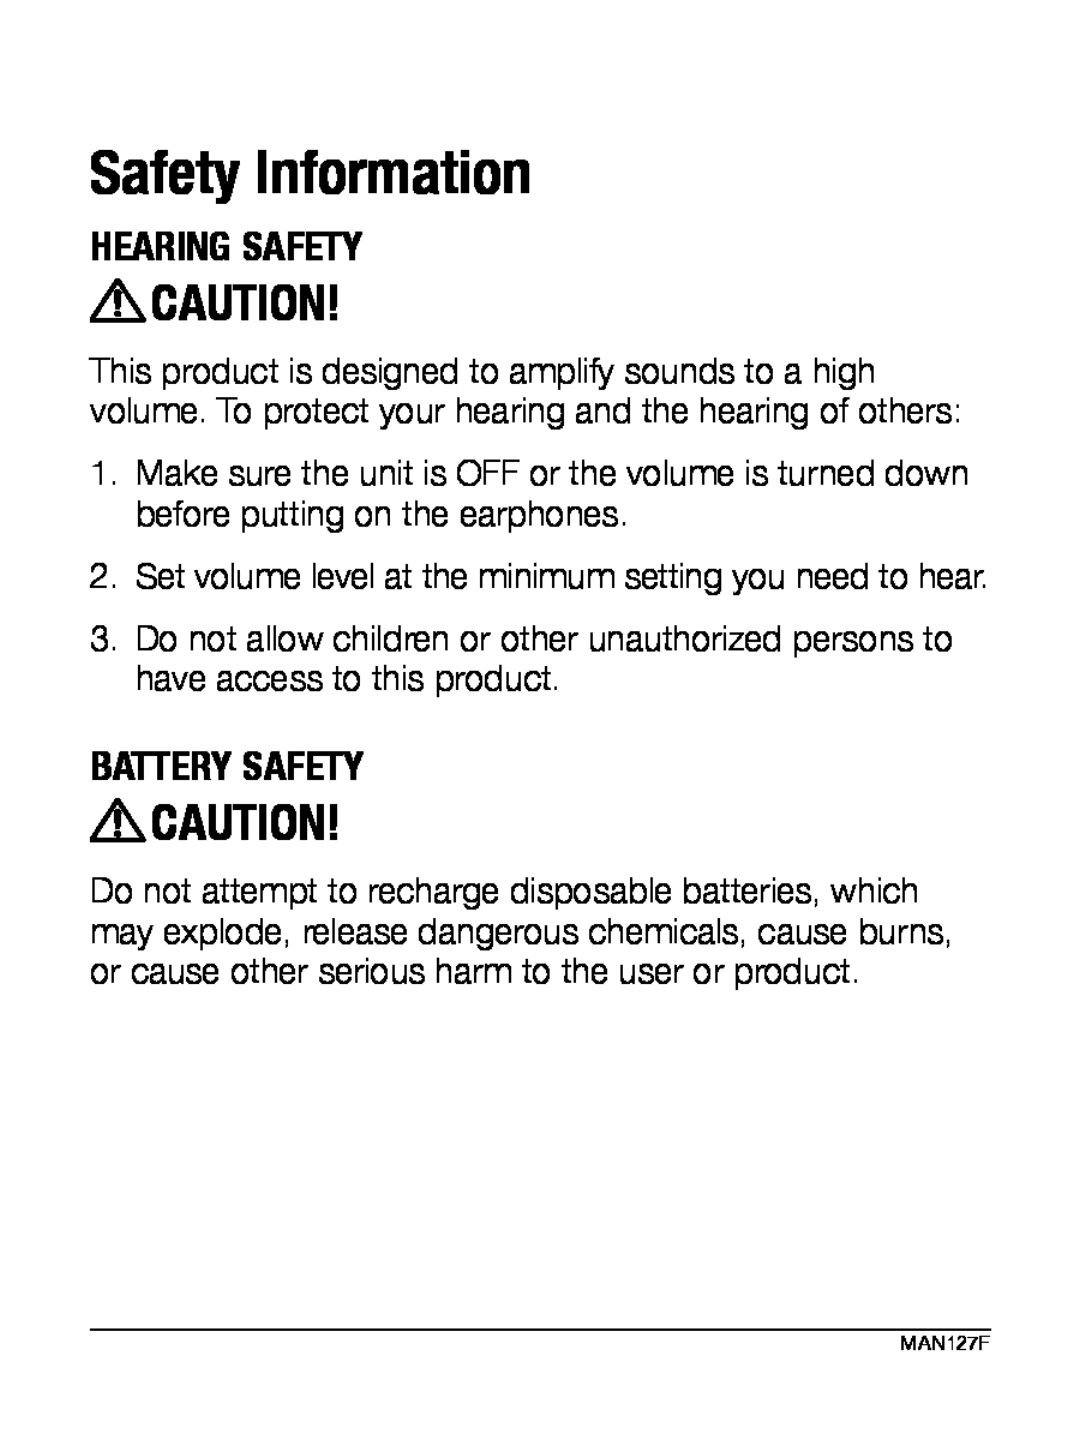 Williams Sound WIR RX22-4 manual Safety Information, Hearing Safety, Battery Safety 